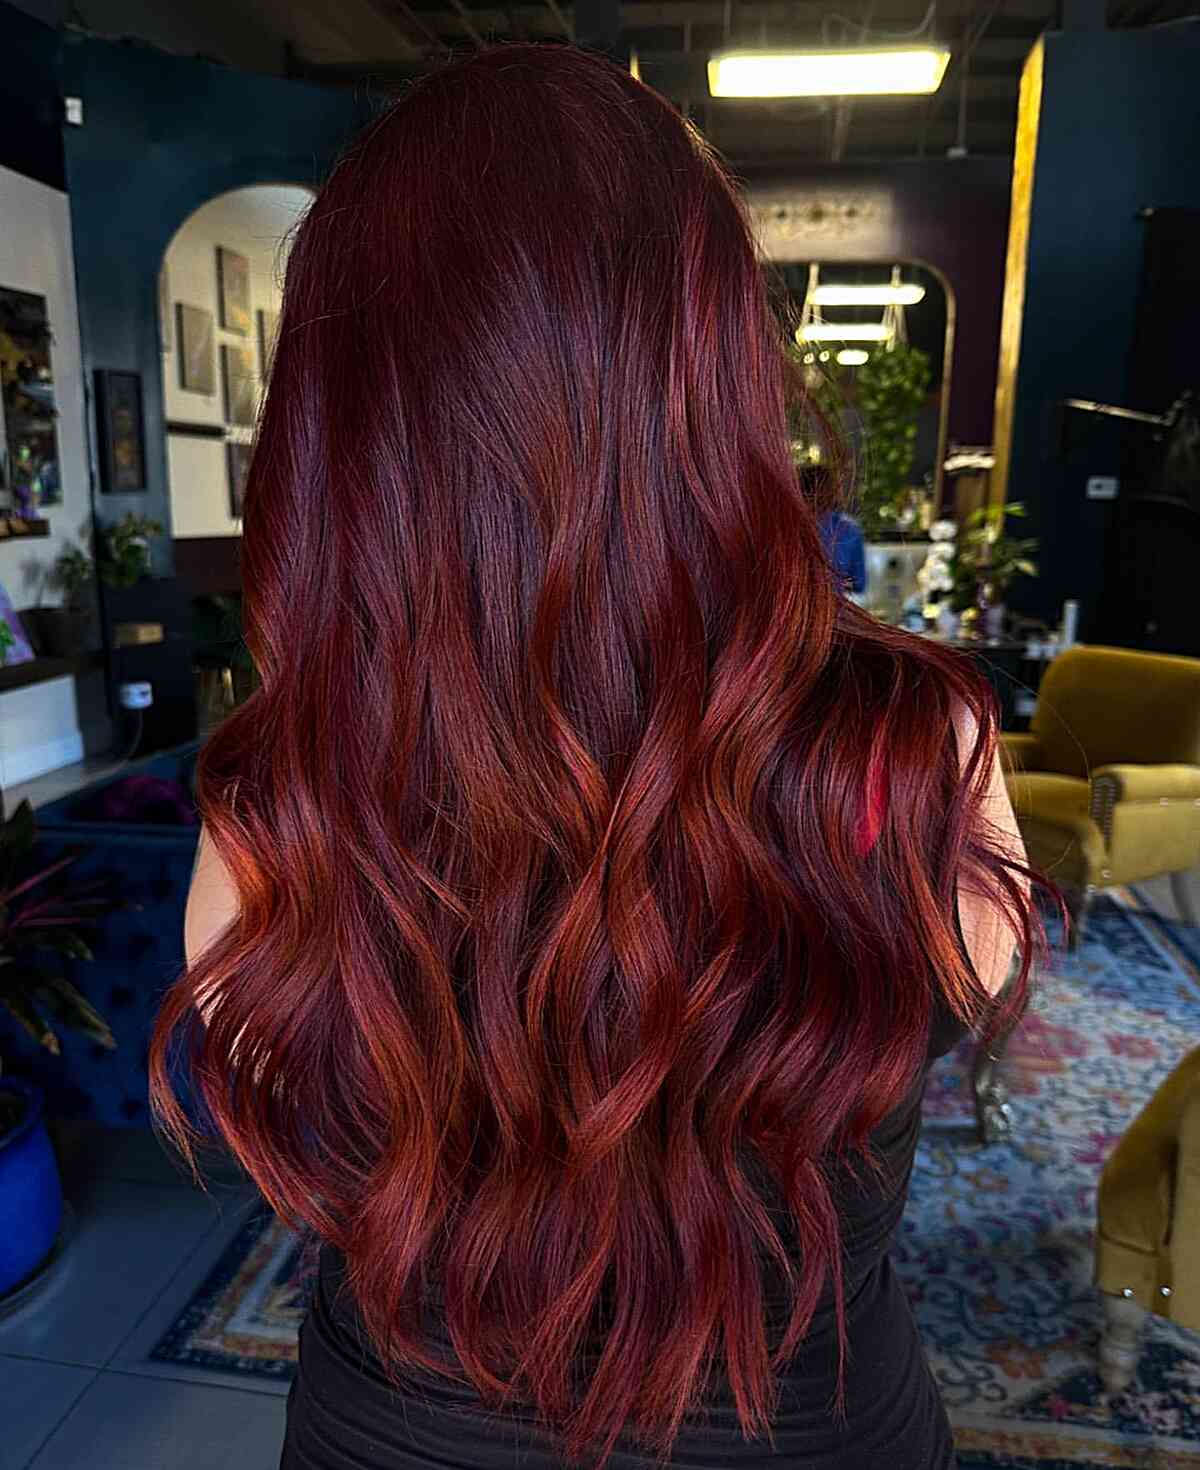 What are the different types of red hair? - Quora